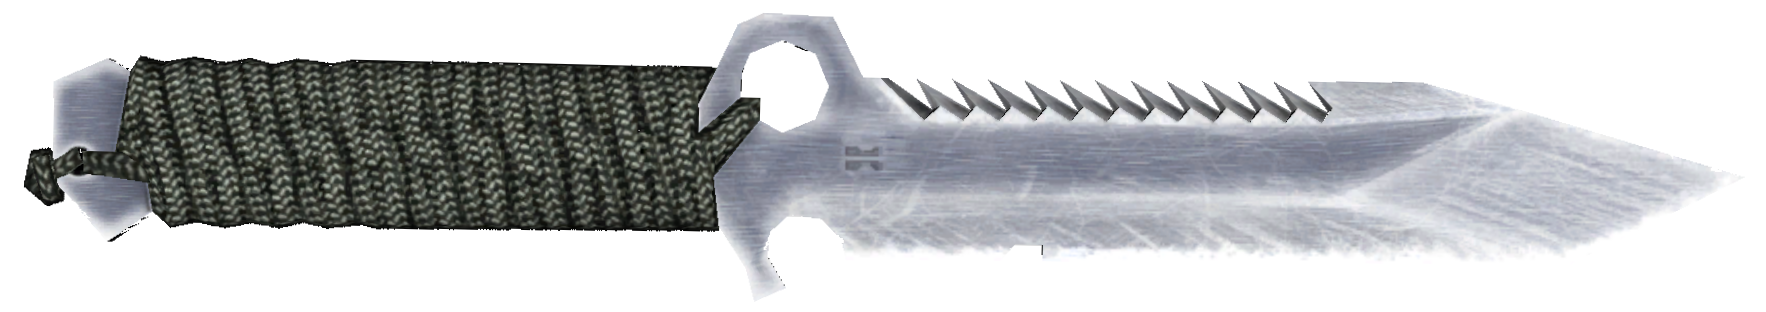 call of duty ghost knife